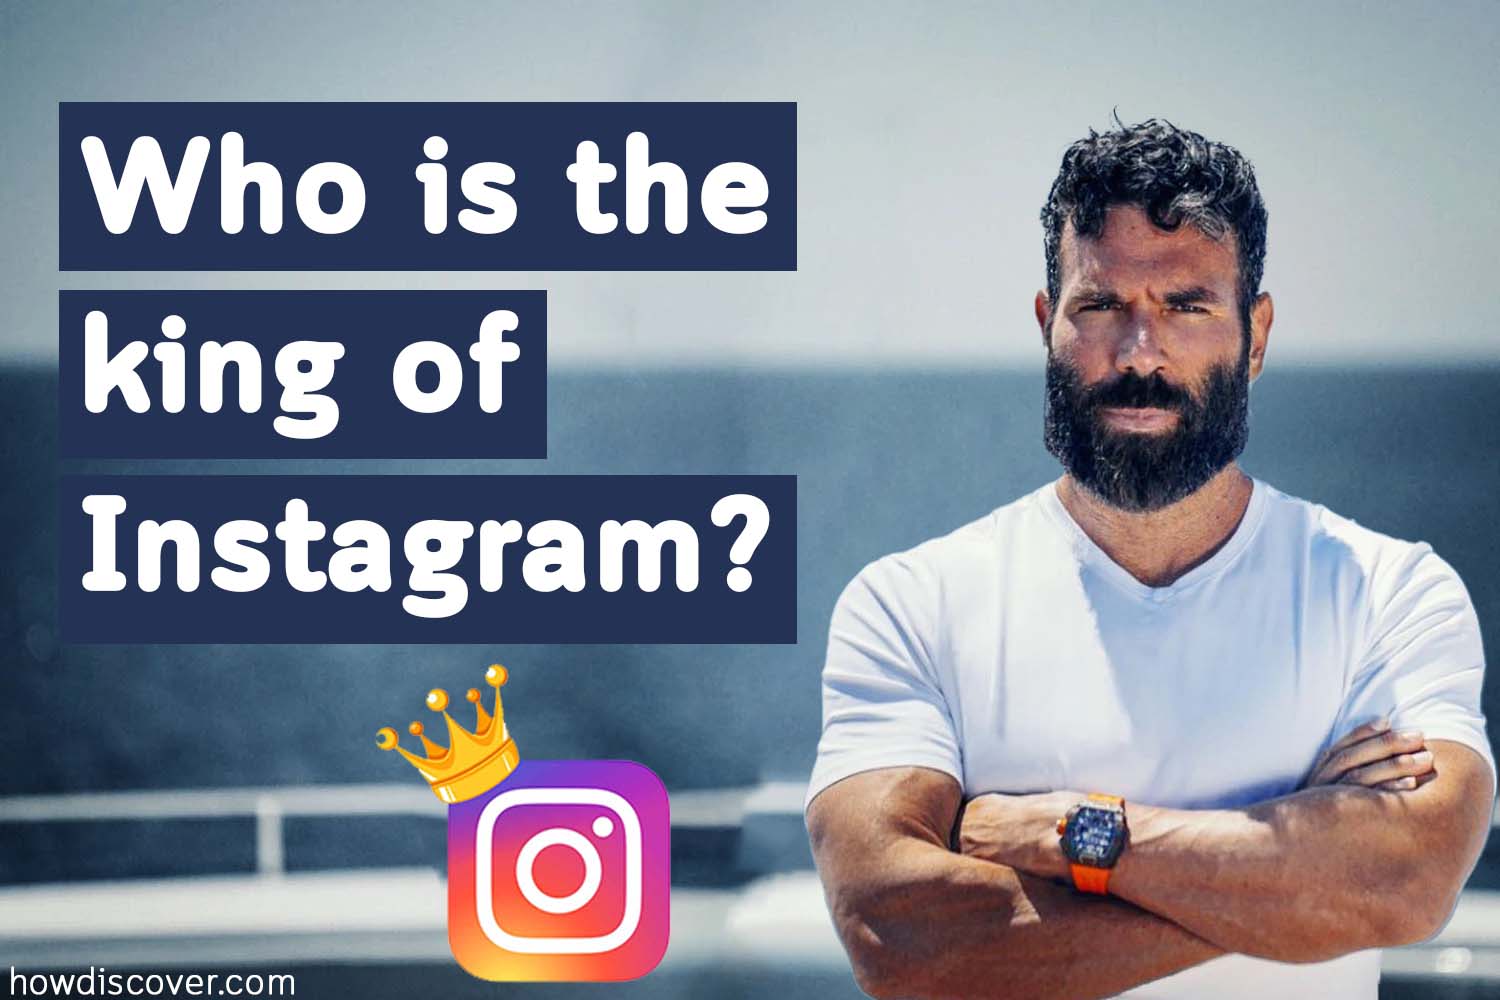 who is the king of Instagram